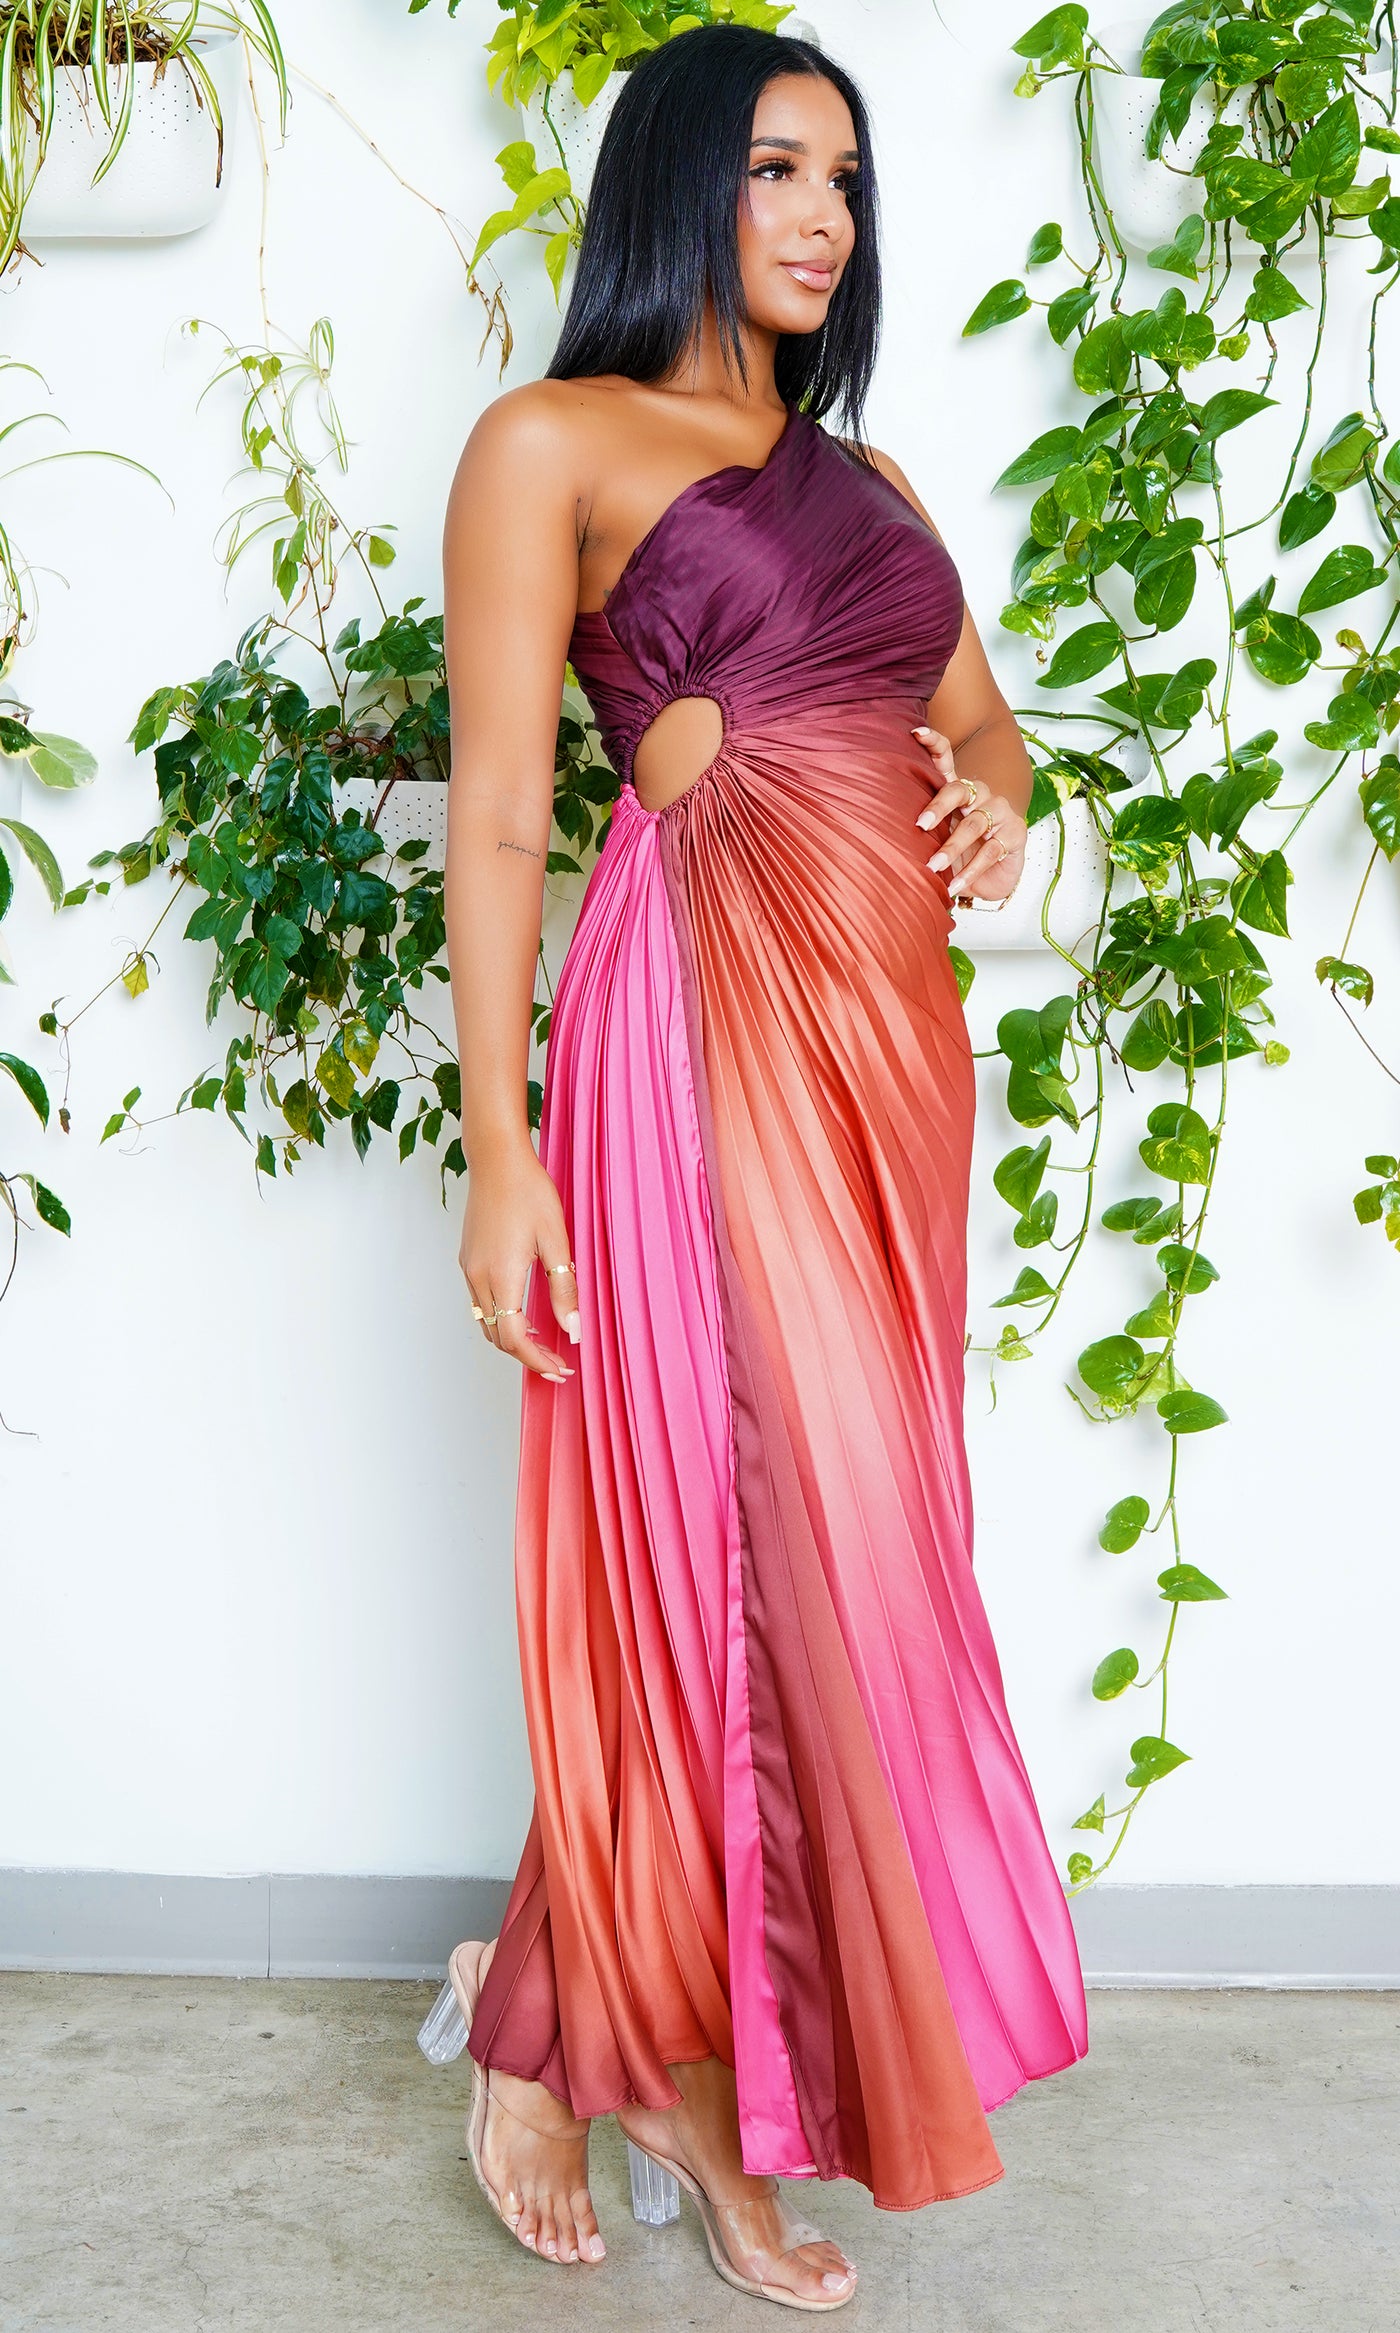 Gorgeous  | One-Shoulder Cutout Asymmetrical Dress - Ombre - Cutely Covered